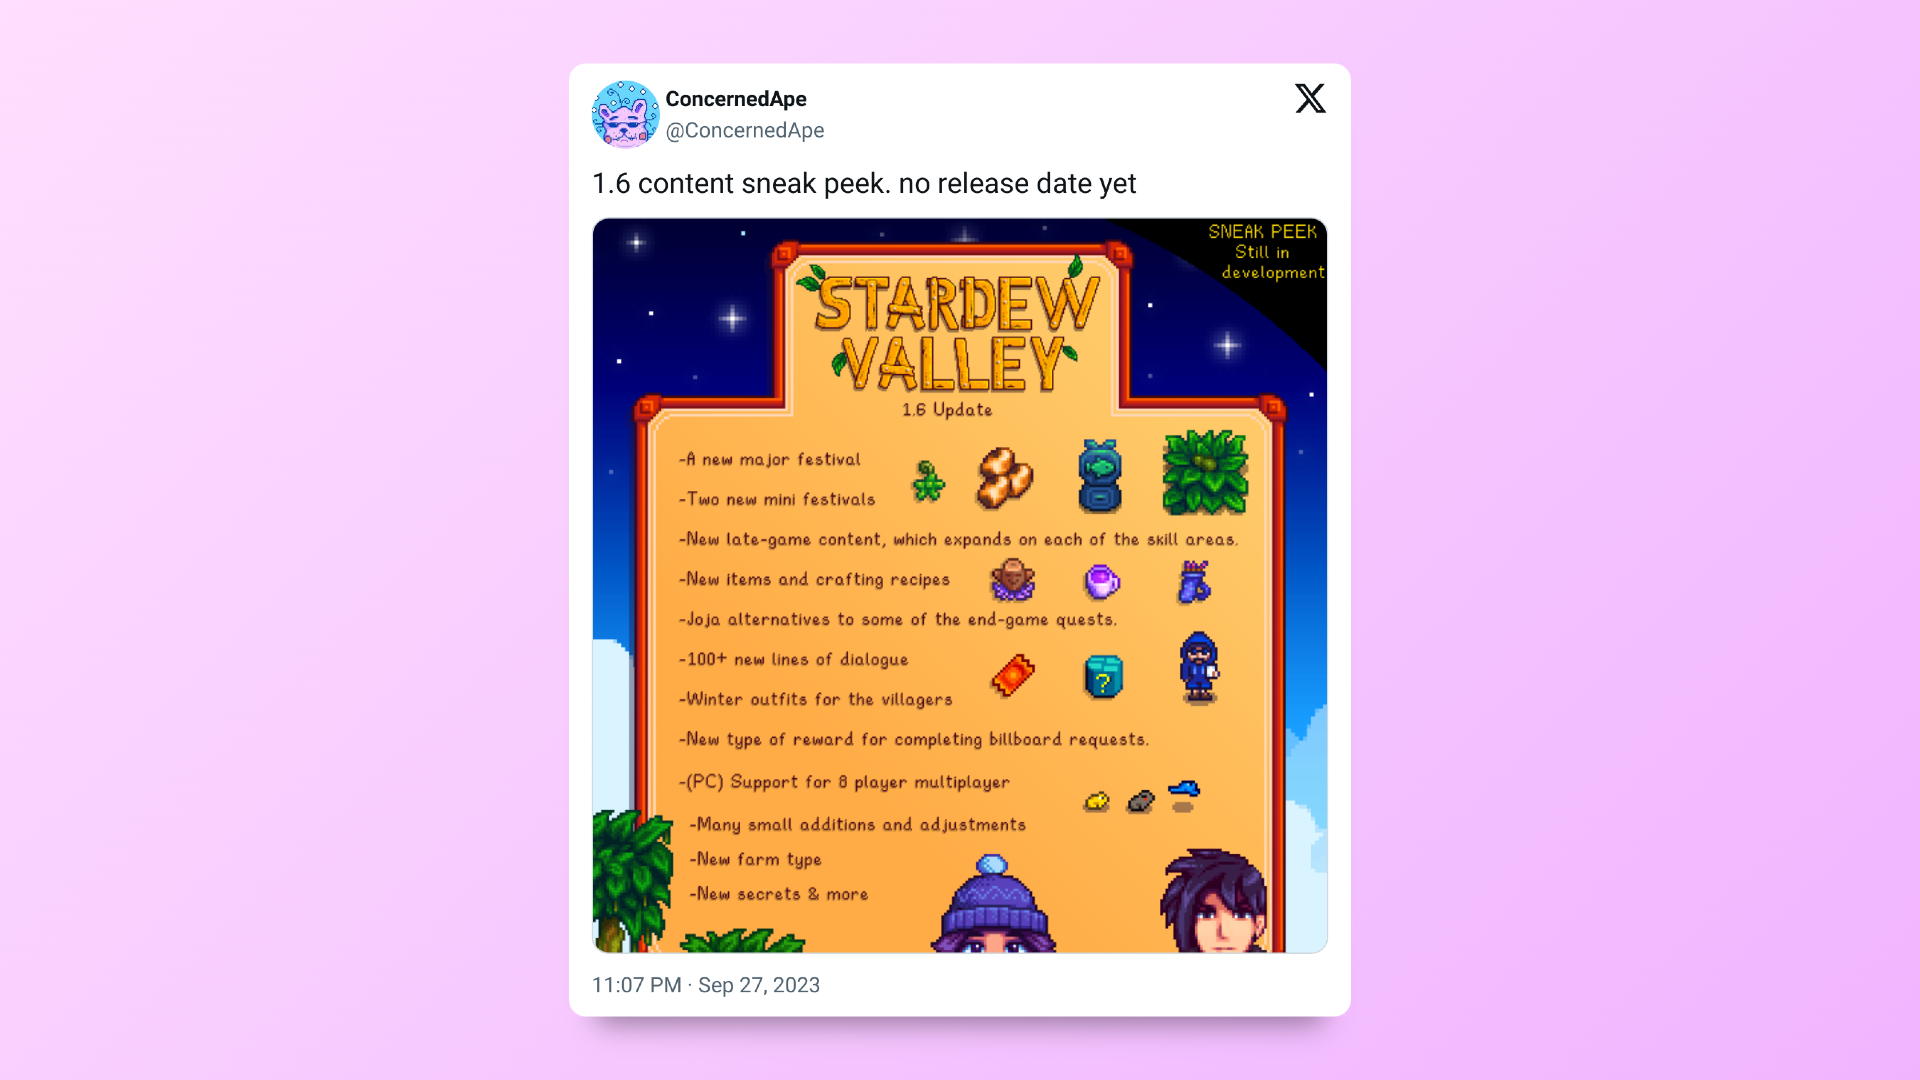 Stardew Valley post from ConernedApe with sneak peek of 1.6 update